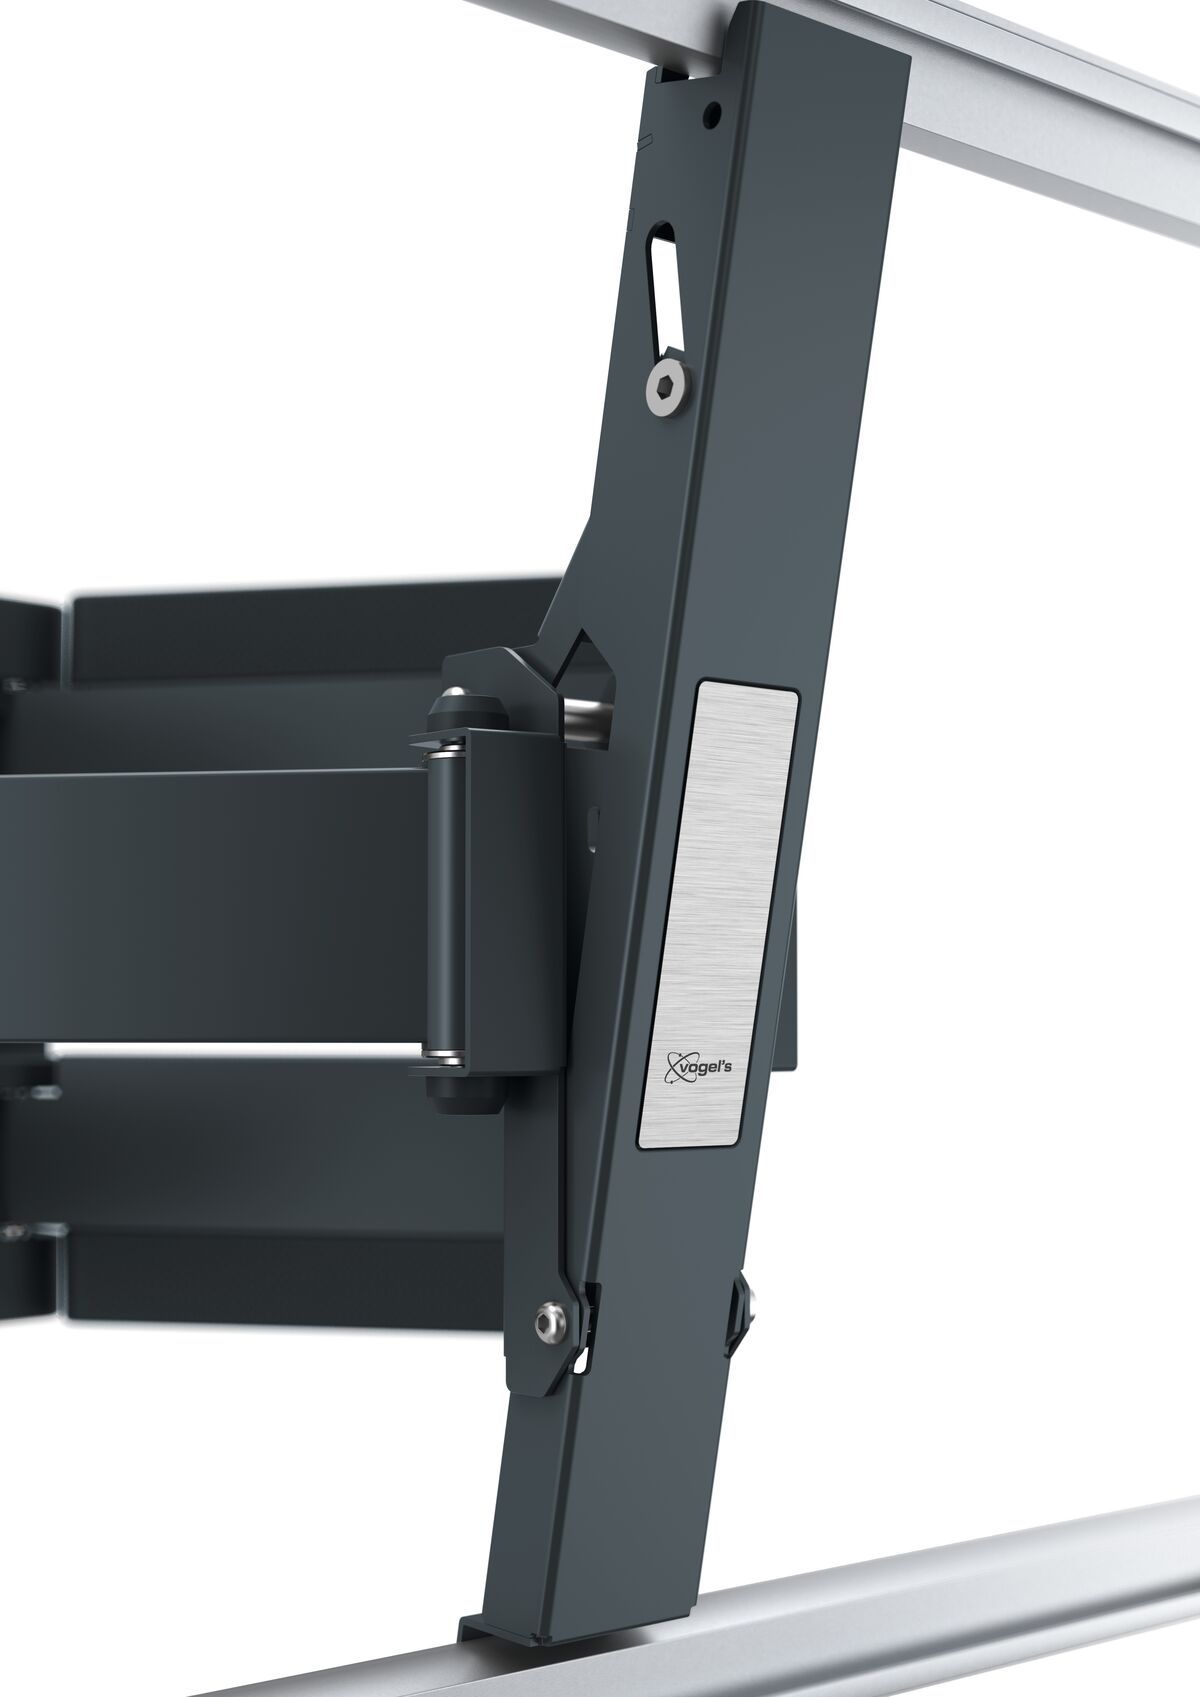 Vogel's THIN 550 ExtraThin Full-Motion TV Wall Mount - Suitable for 40 up to 100 inch TVs - Forward and turning motion (up to 120°) - Tilt up to 20° - Detail